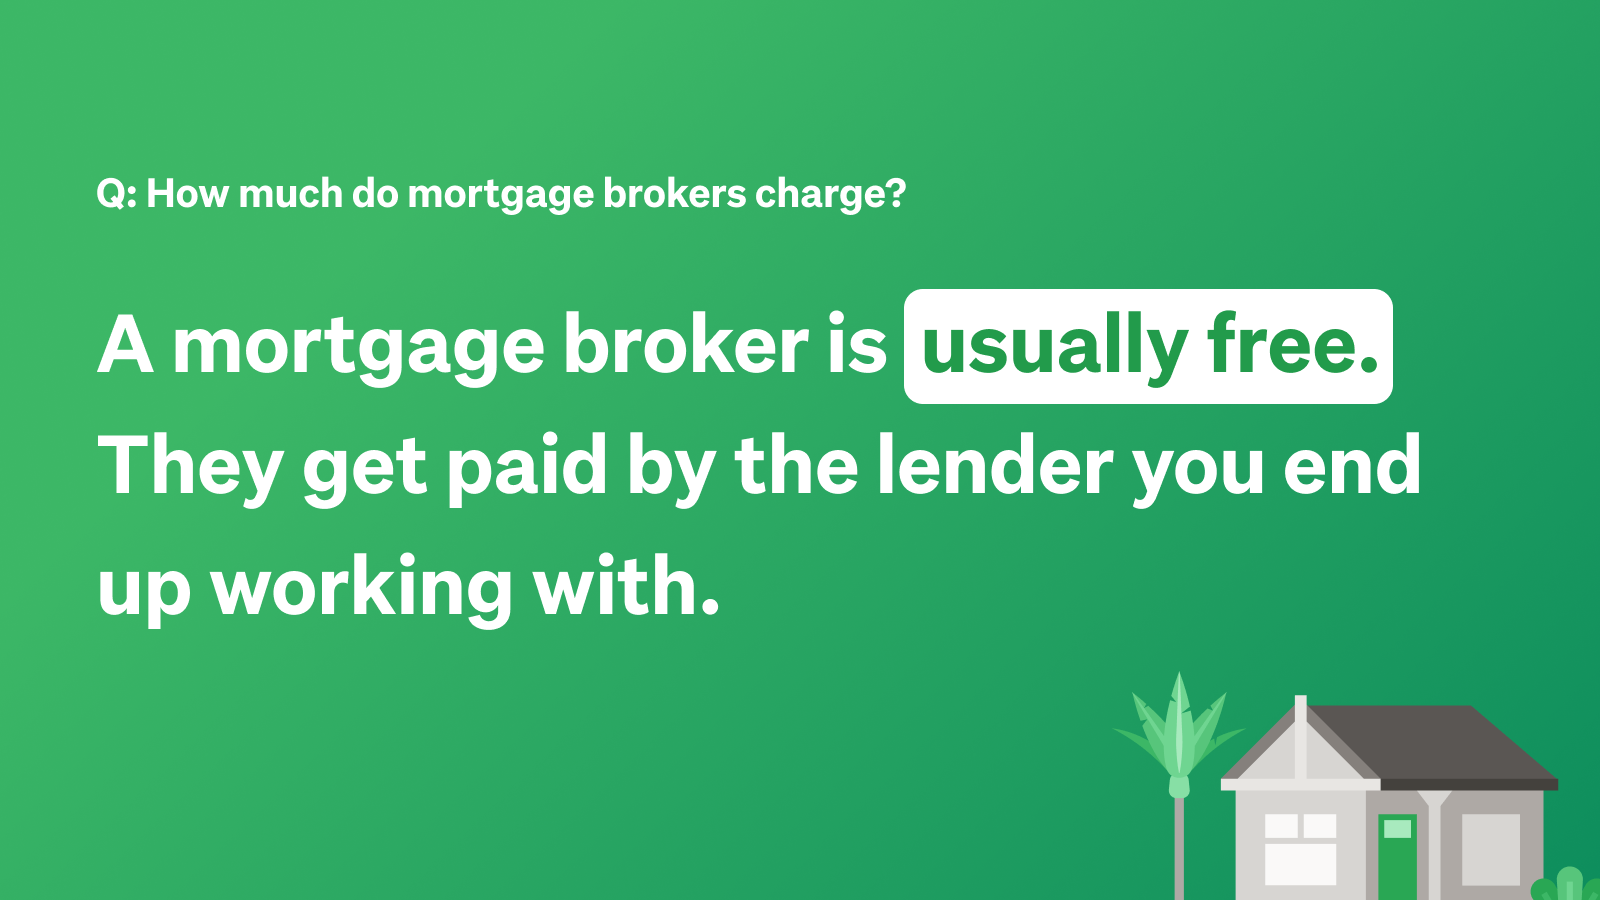 Question: How much do mortgage brokers charge? Answer: A mortgage broker is usually free, they get paid by the lender you end up working with.